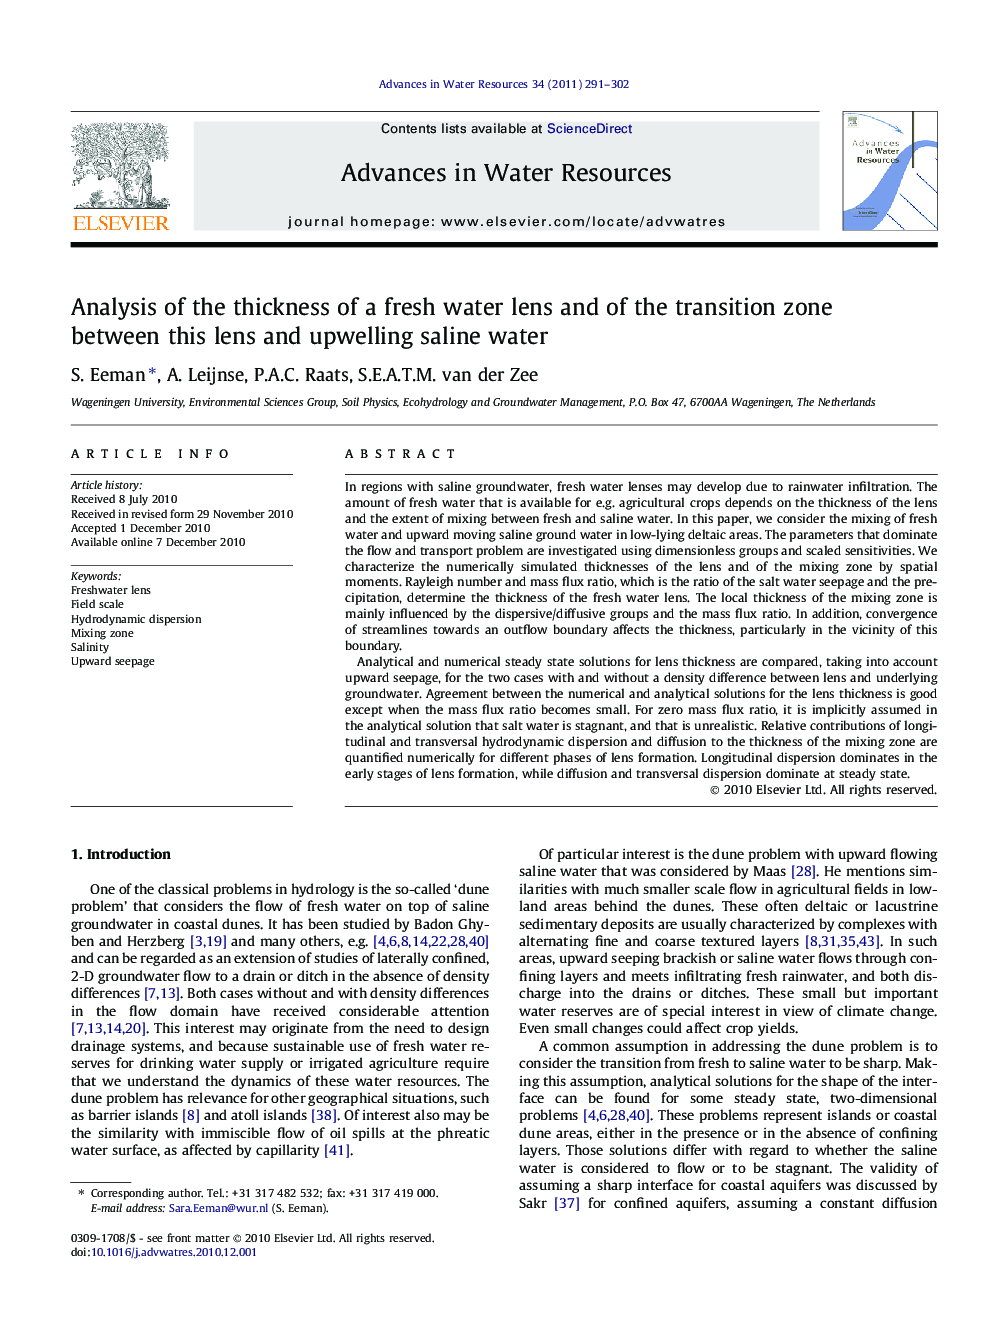 Analysis of the thickness of a fresh water lens and of the transition zone between this lens and upwelling saline water